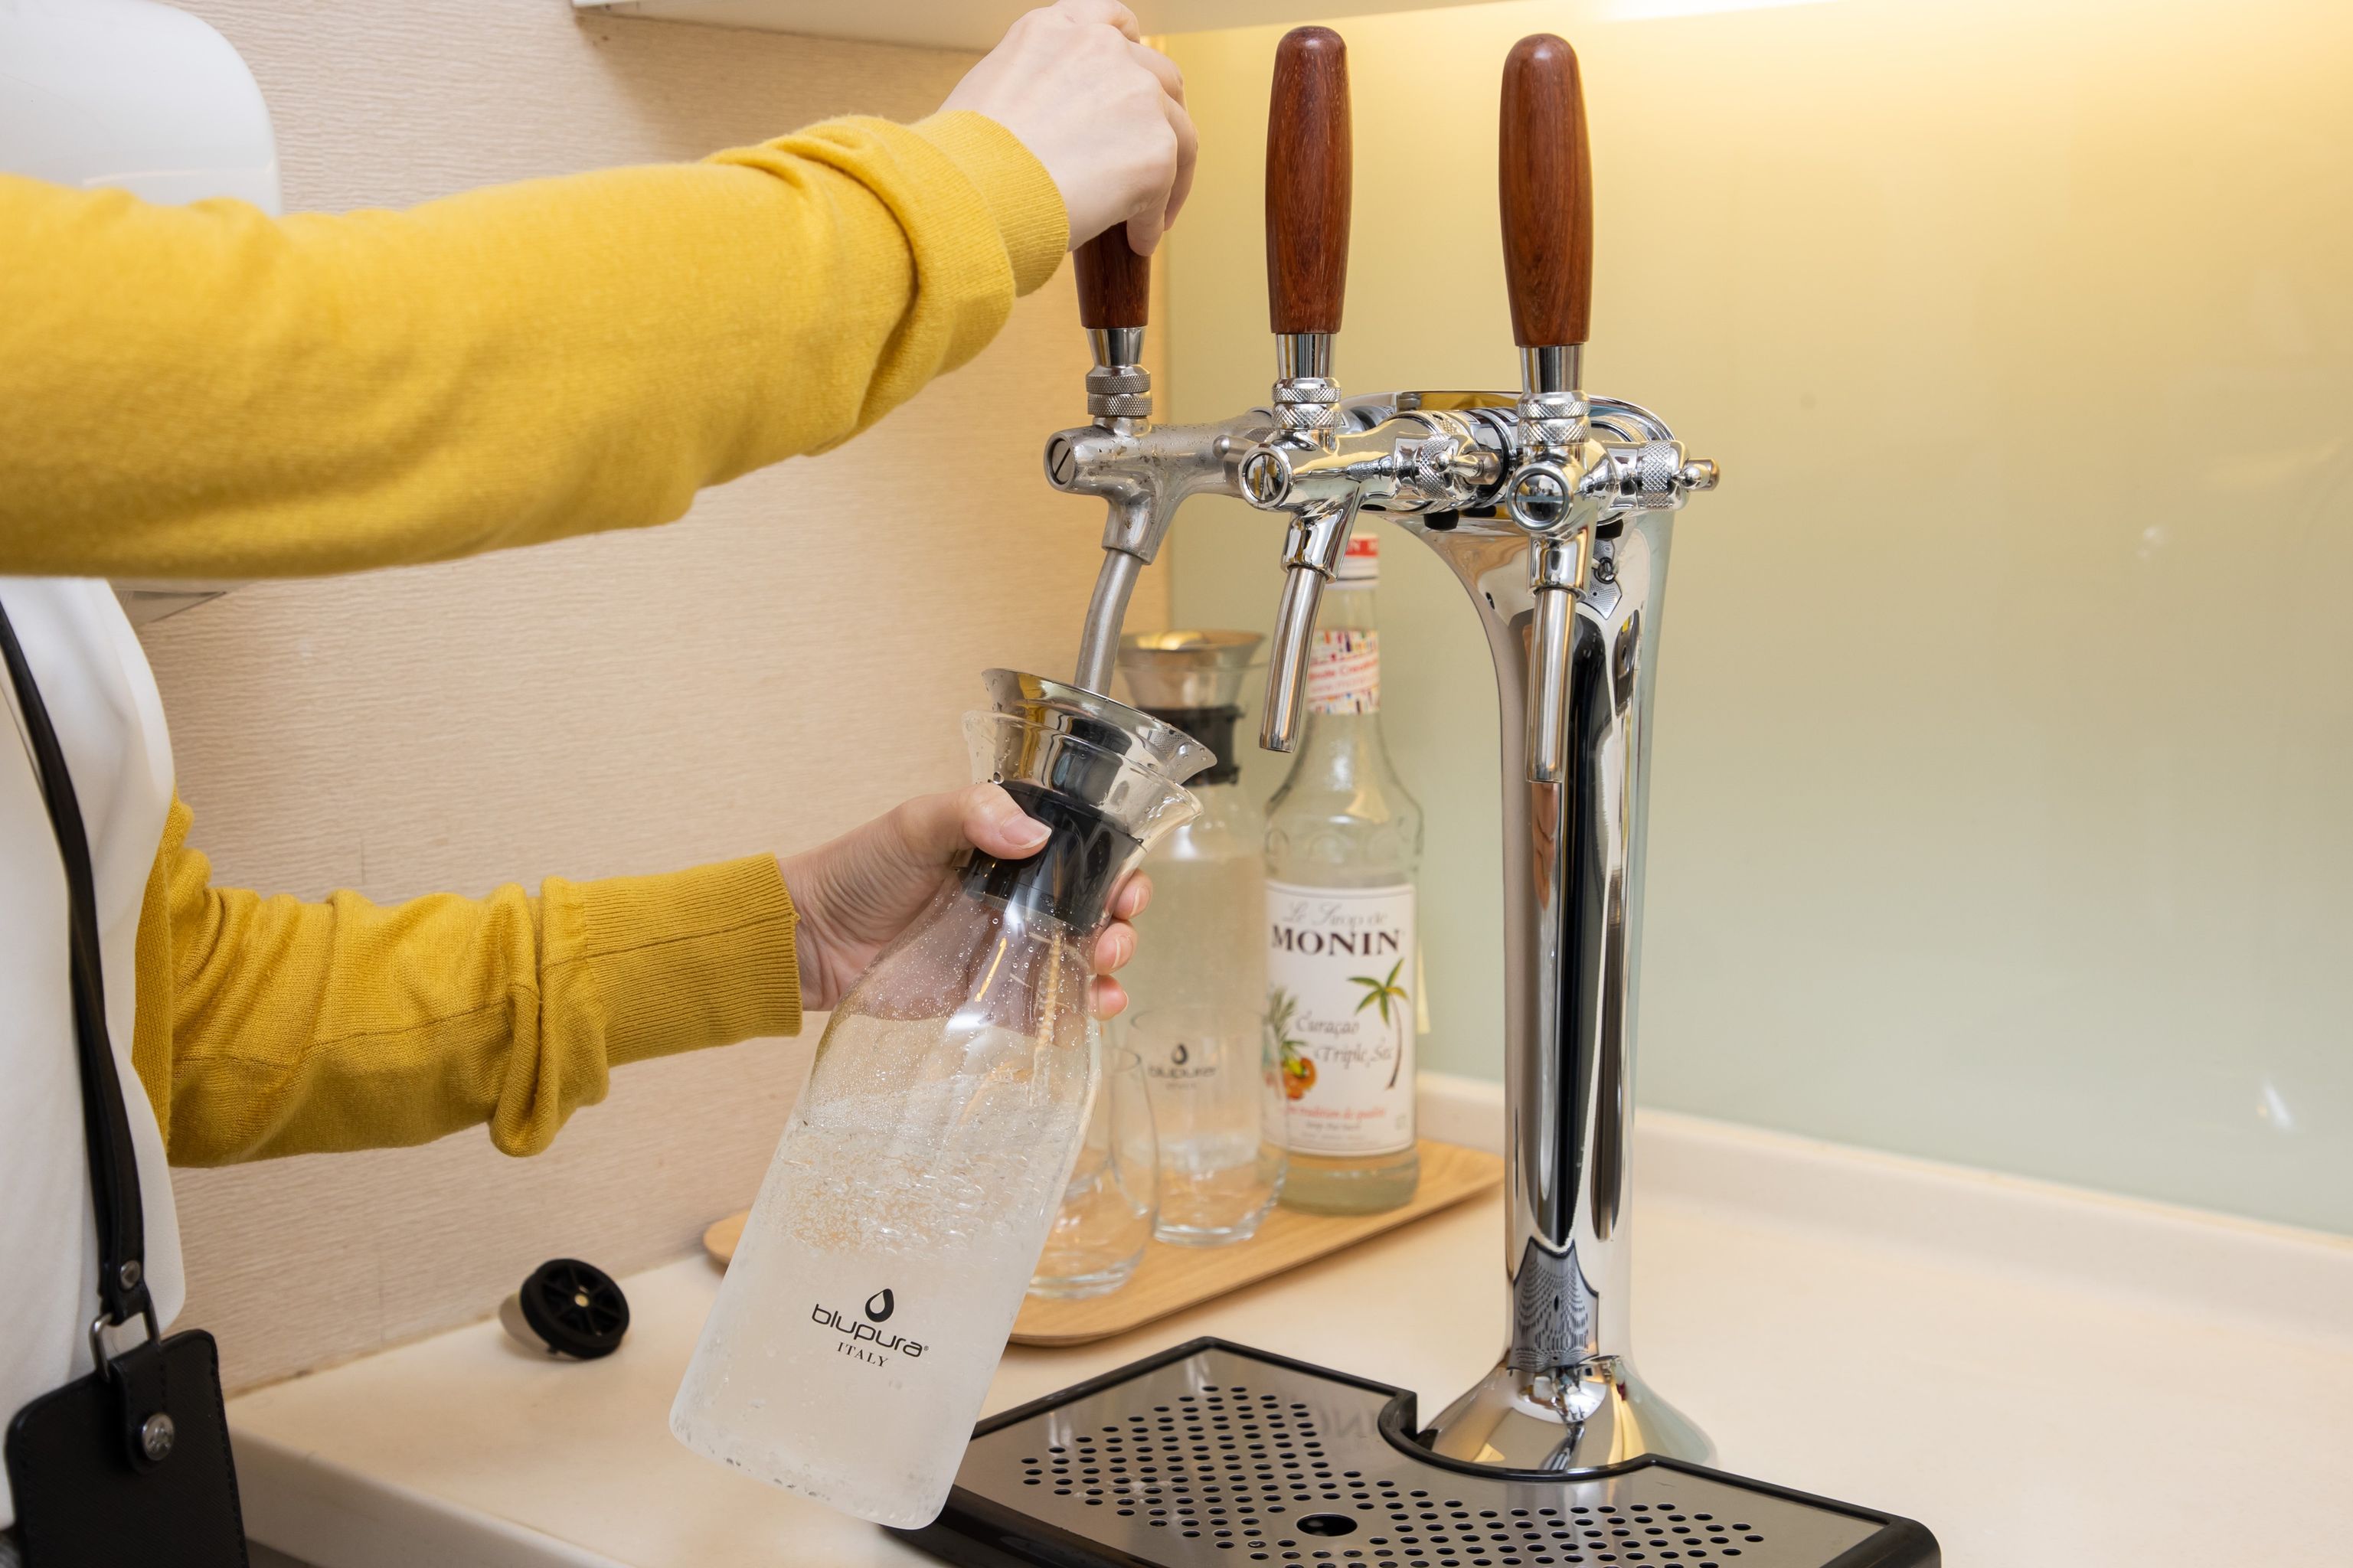 CPT receives visitors using environmentally friendly and healthy sparkling water replacing disposable plastic or paper cups.  Image: United Daily News.